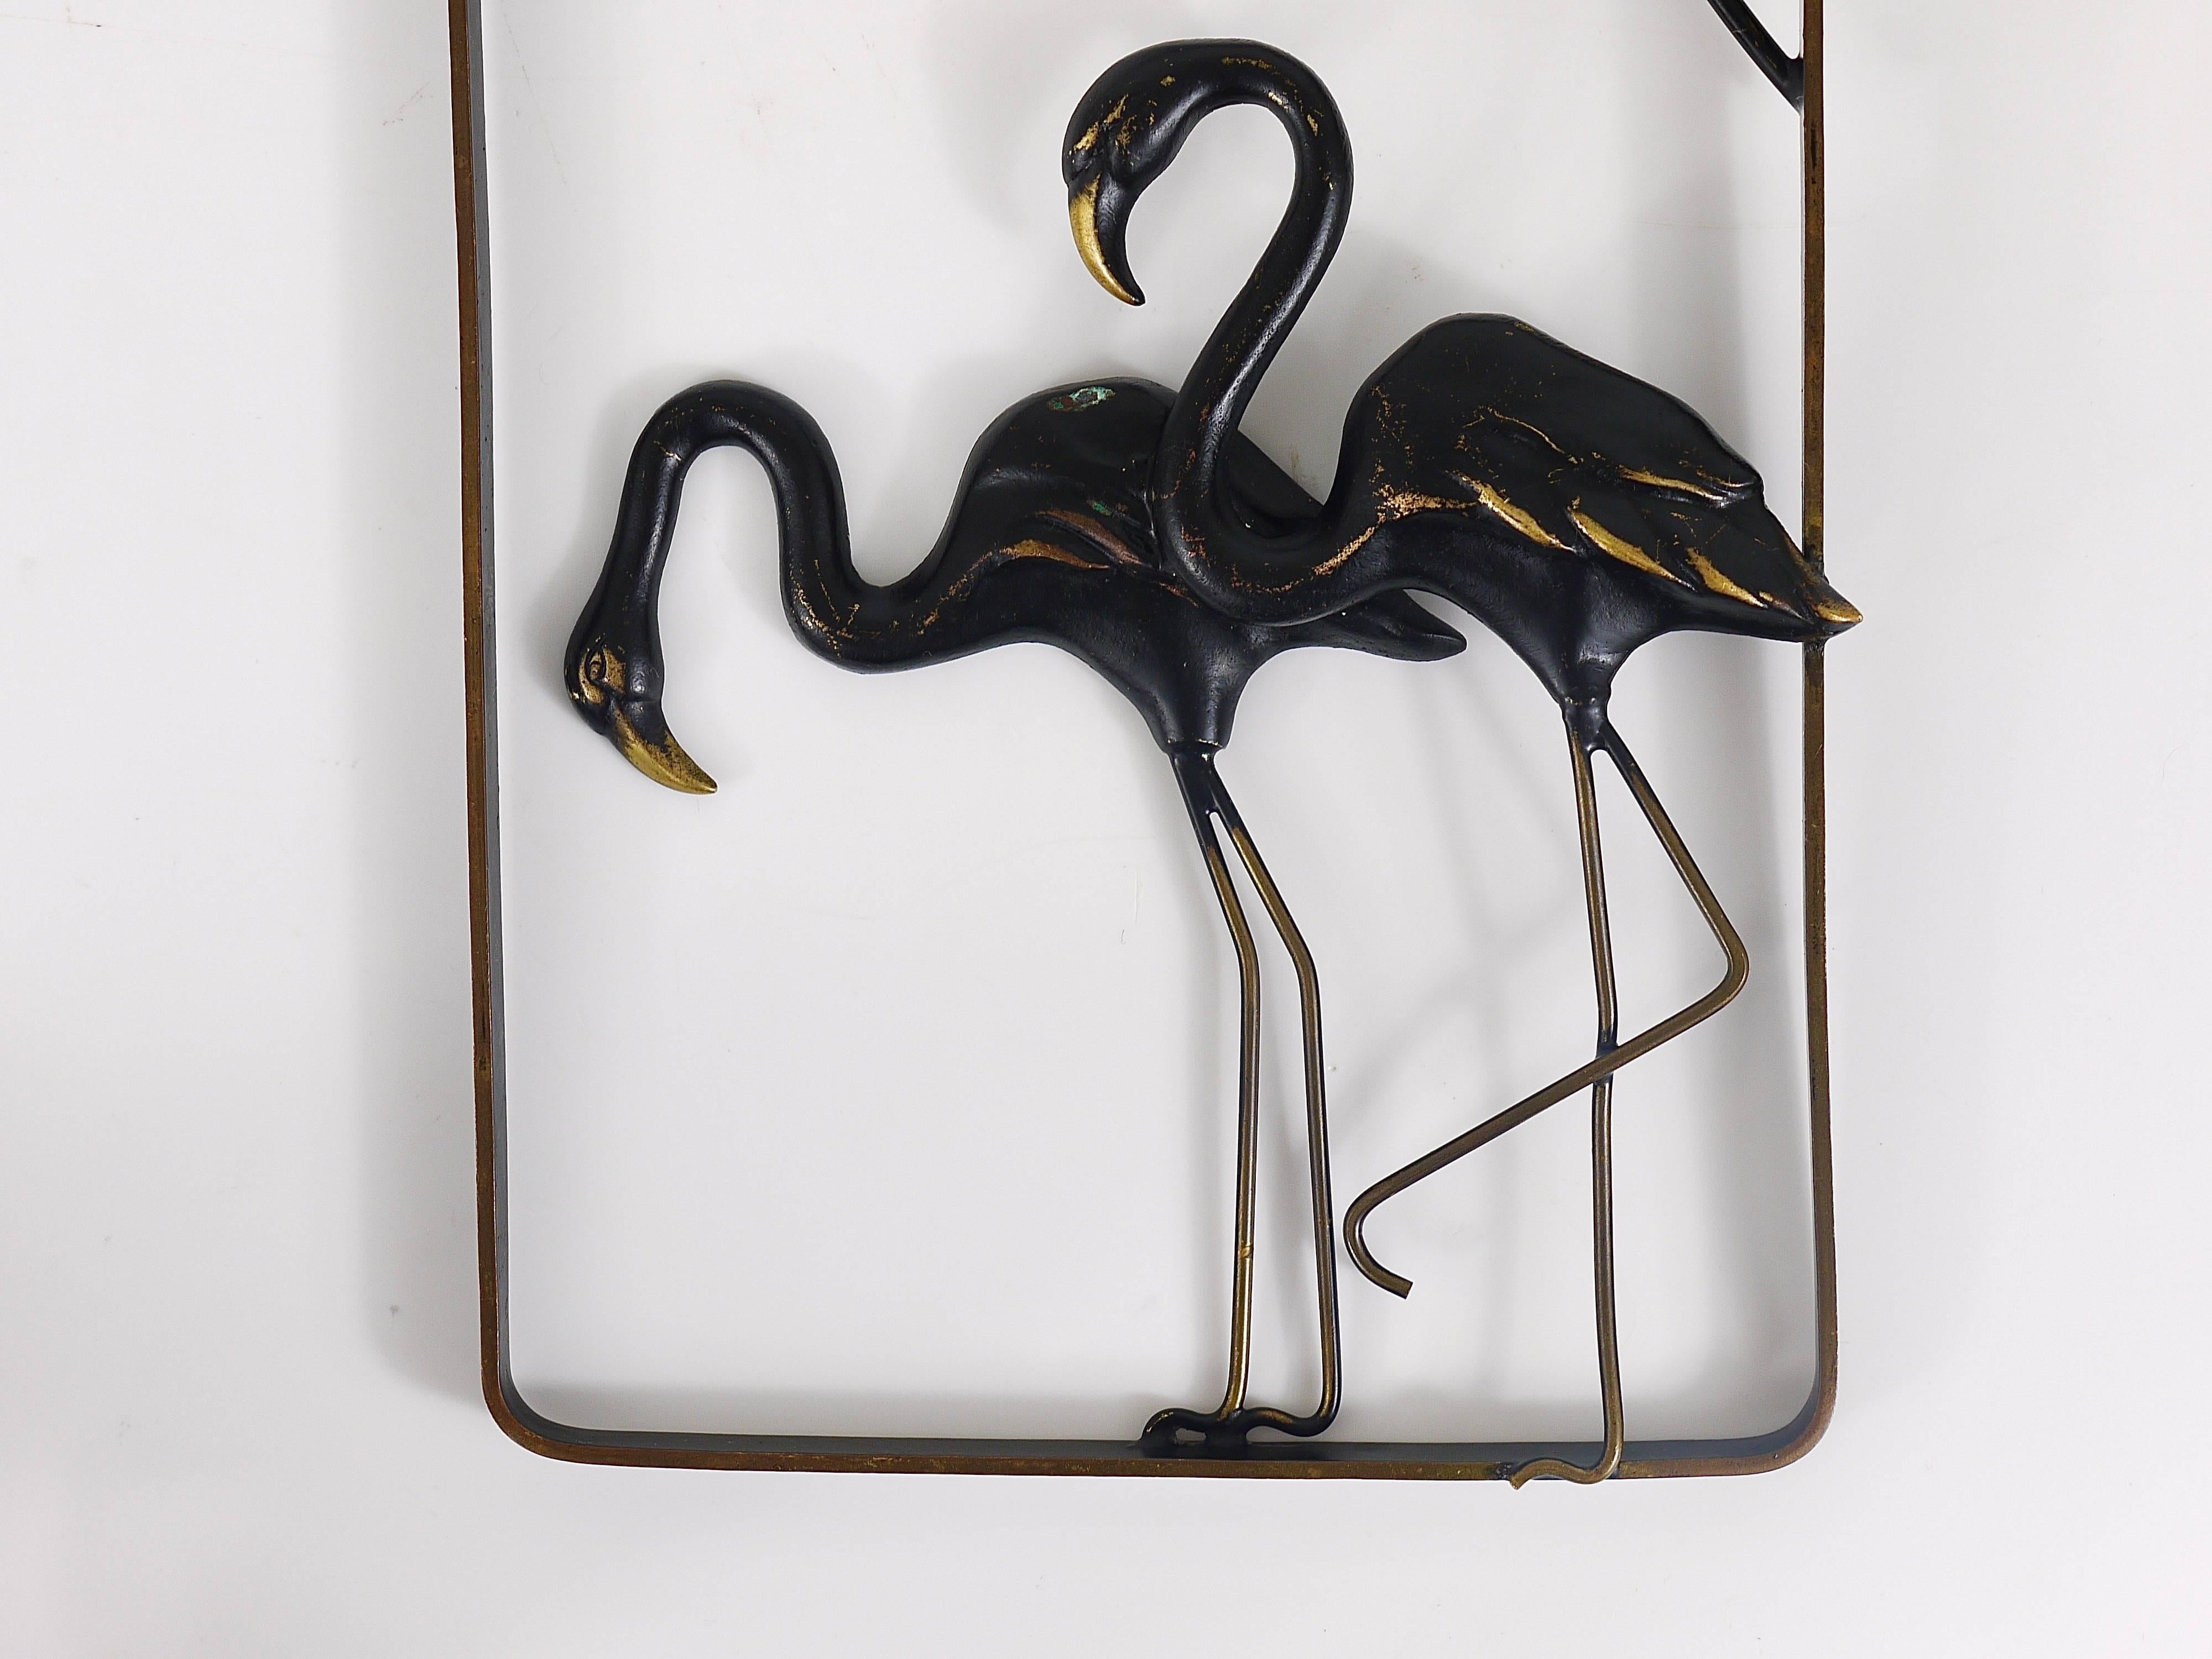 A lovely Mid-Century mural, displaying two flamingos on a frame, all made of brass. A charming design by Walter Bosse, manufactured in the 1950s by Hertha Baller, Austria. In excellent condition. We offer more Walter Bosse objects in our other